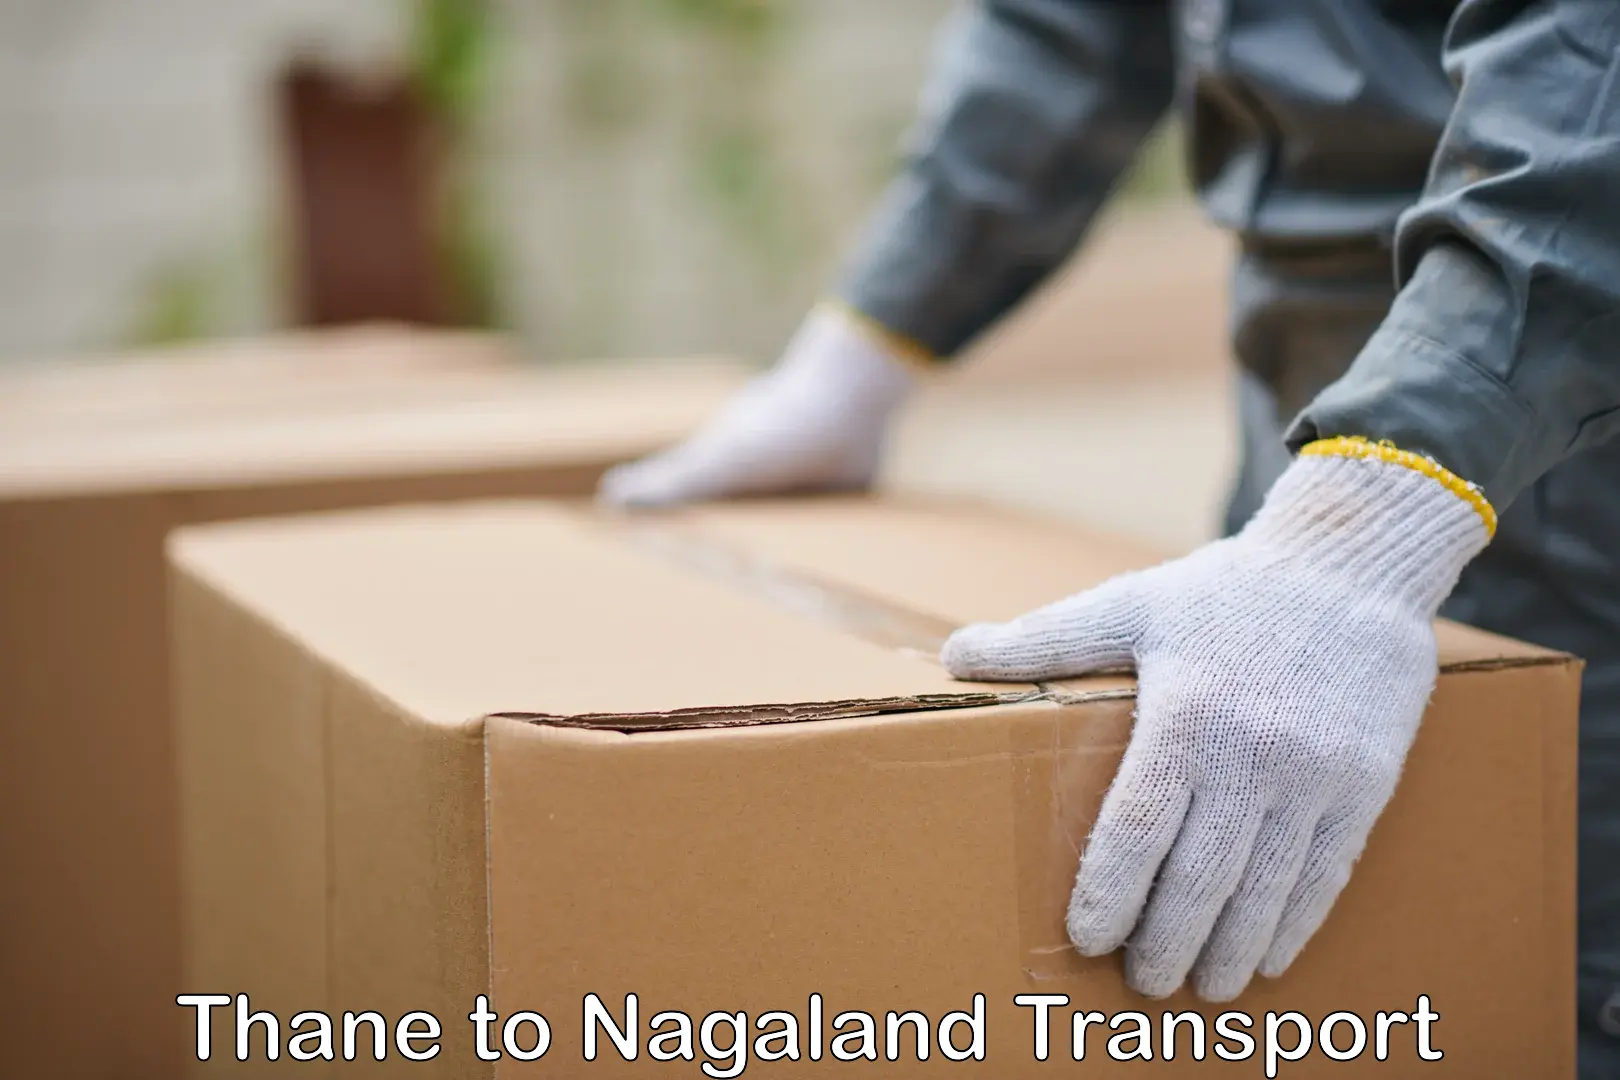 Online transport service Thane to Nagaland